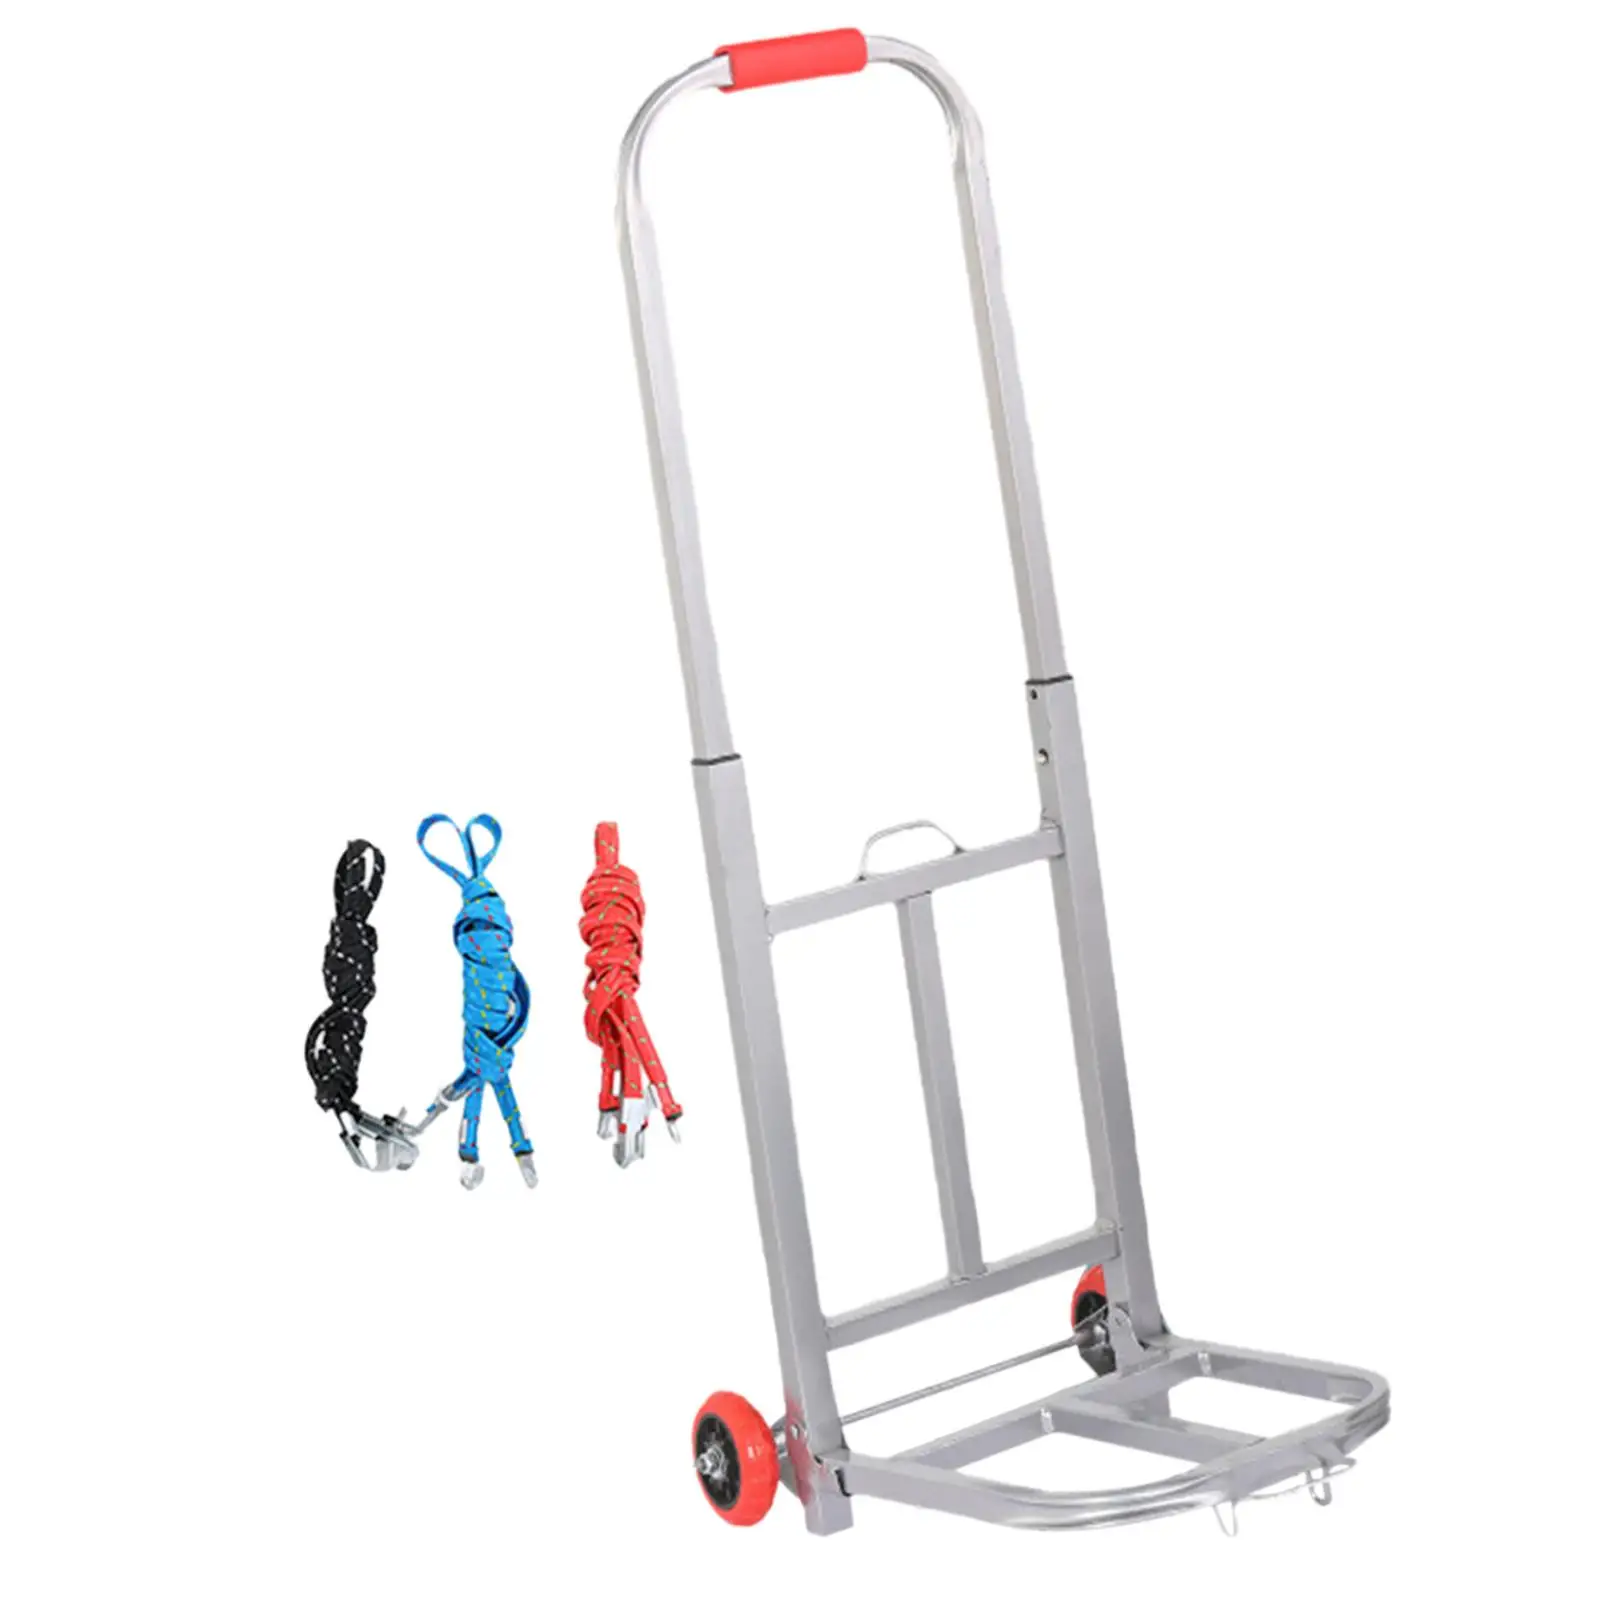 Foldable Folding Hand Truck Luggage Handcart Metal Frame for Personal Travel